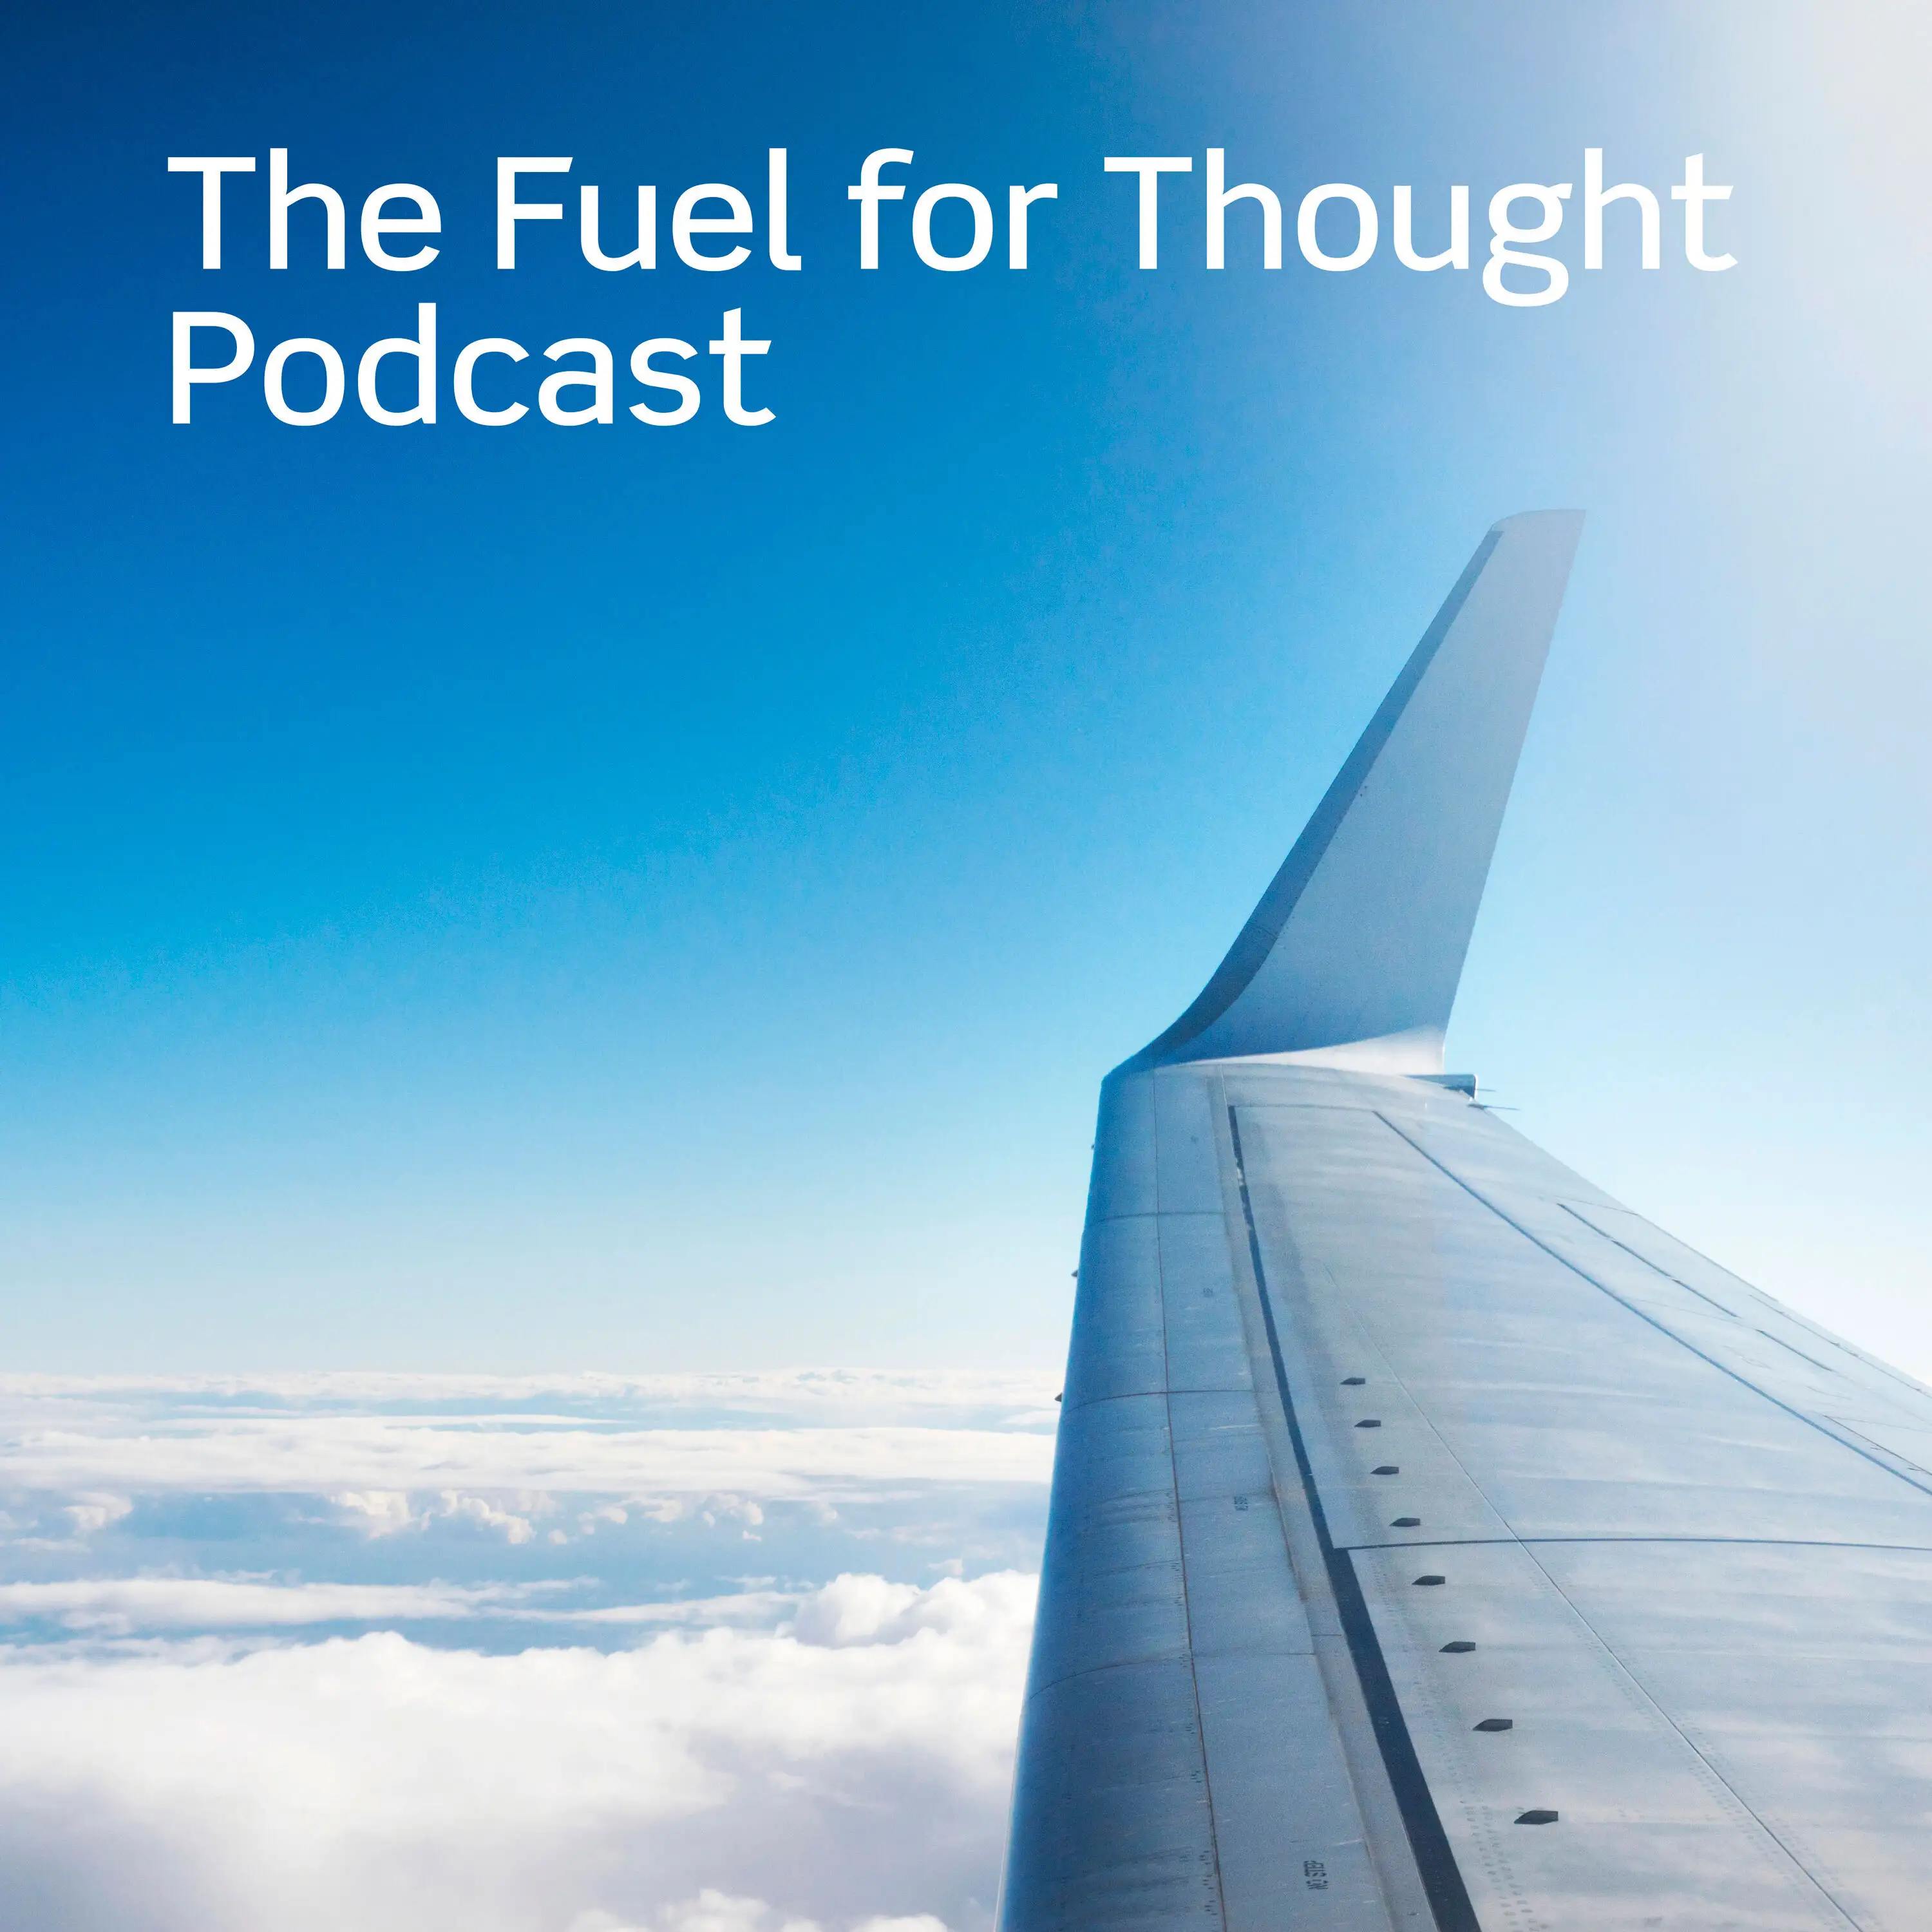 Sustainable aviation fuel - it is finally happening!